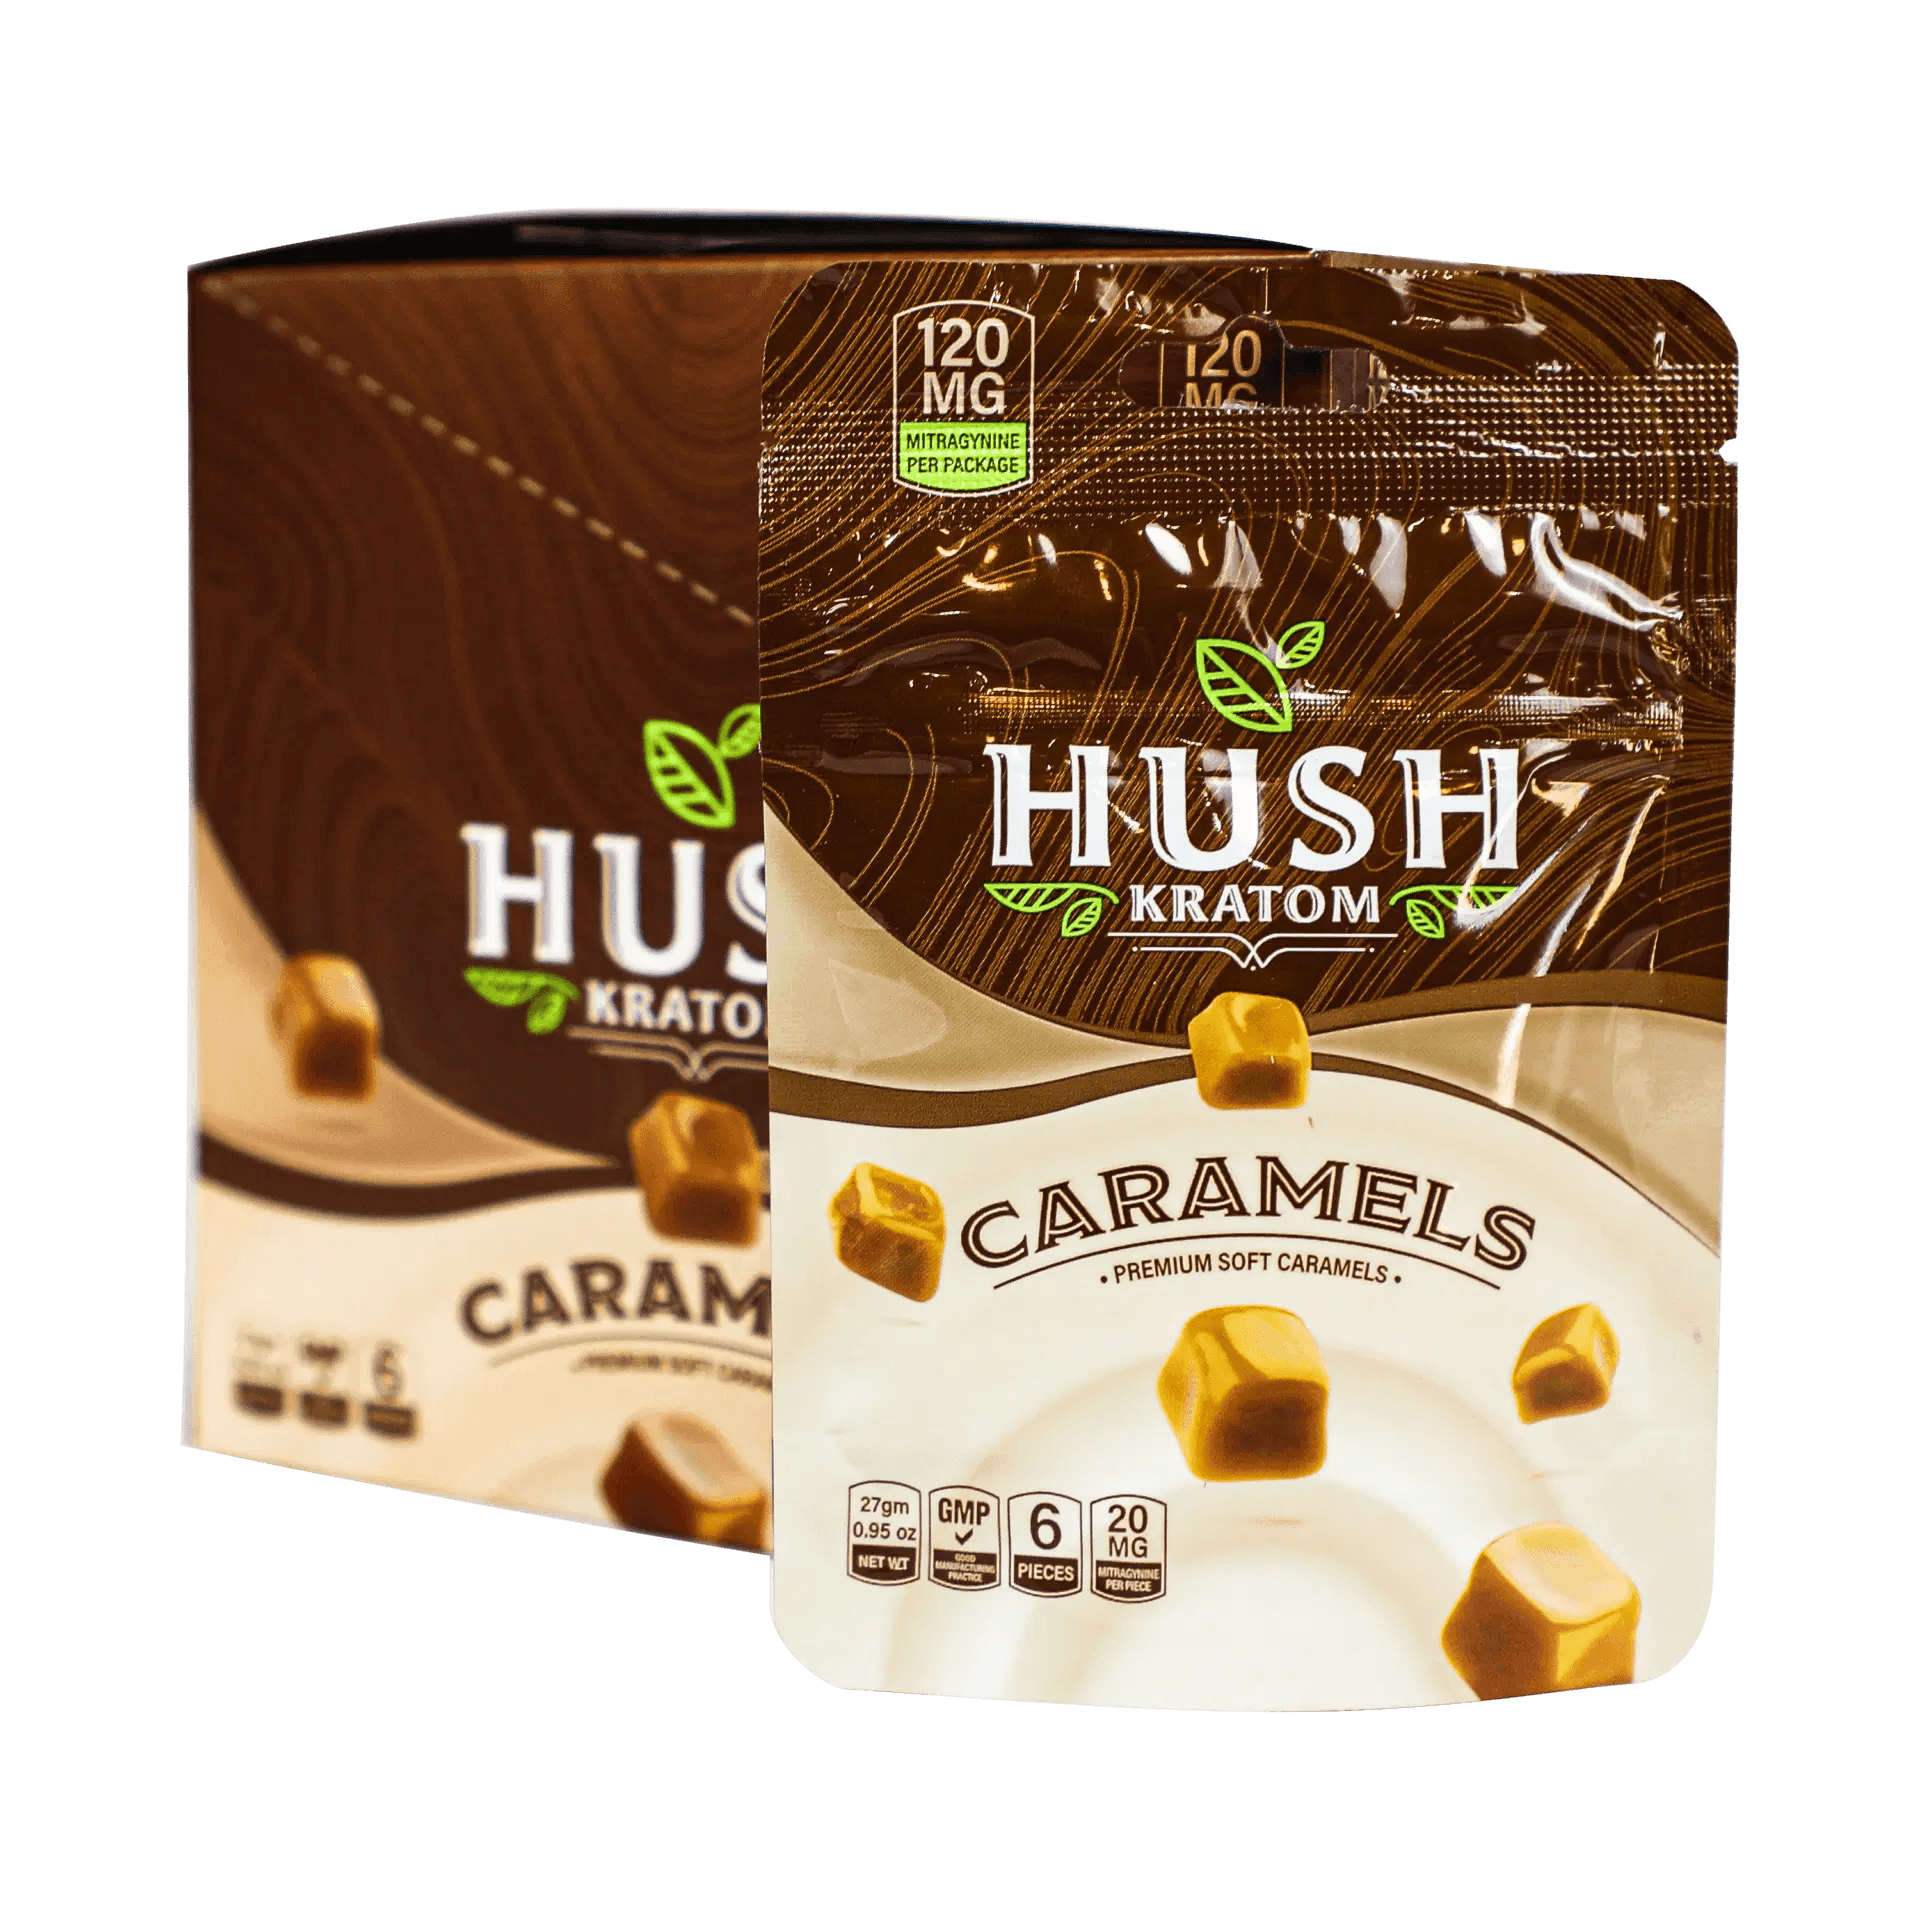 Hush Kratom Extract Infused Caramels